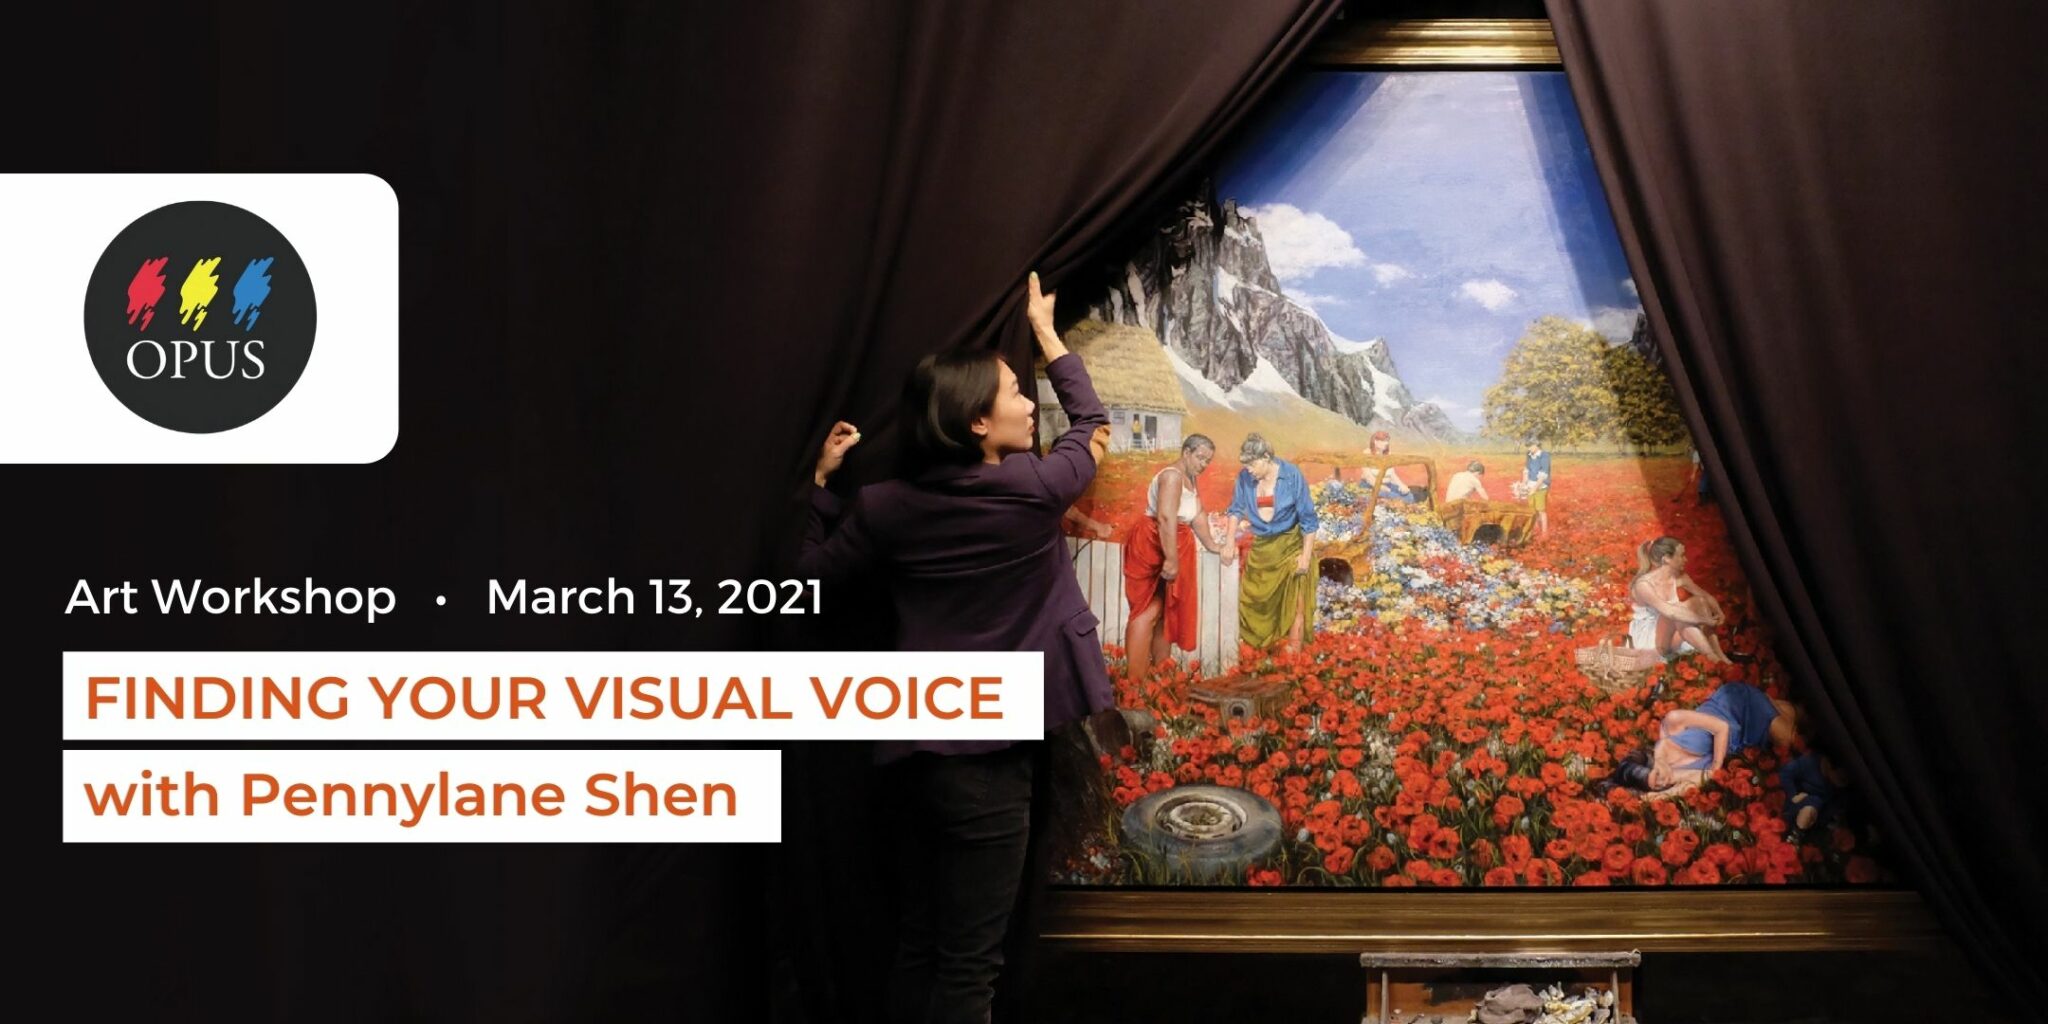 Event: Finding Your Visual Voice with Pennylane Shen